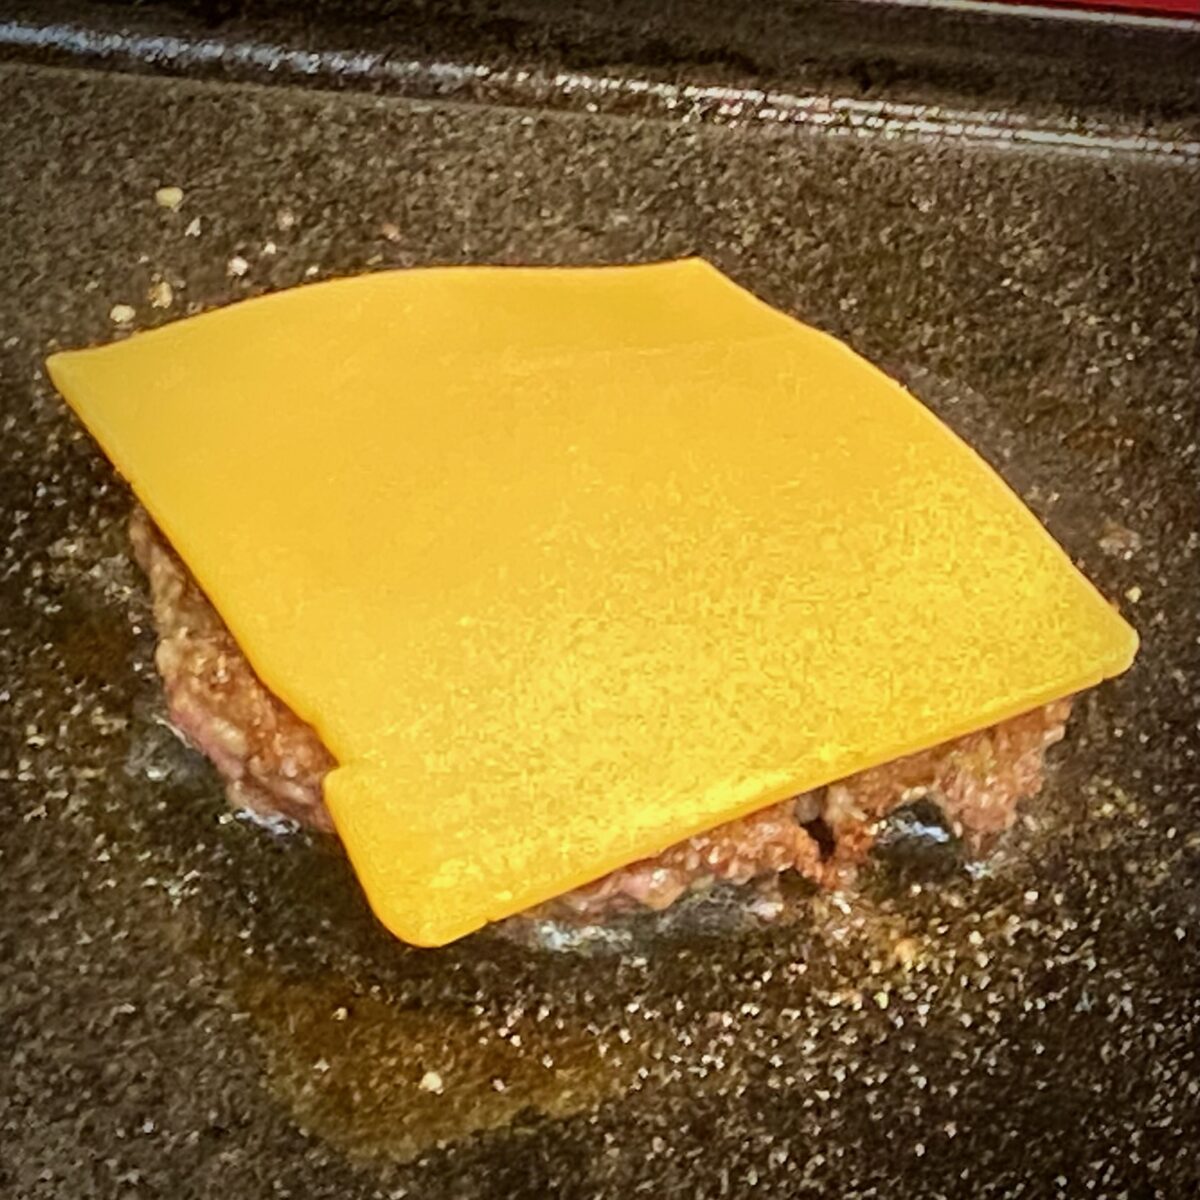 A slice of American cheese on top of a smash burger patty.